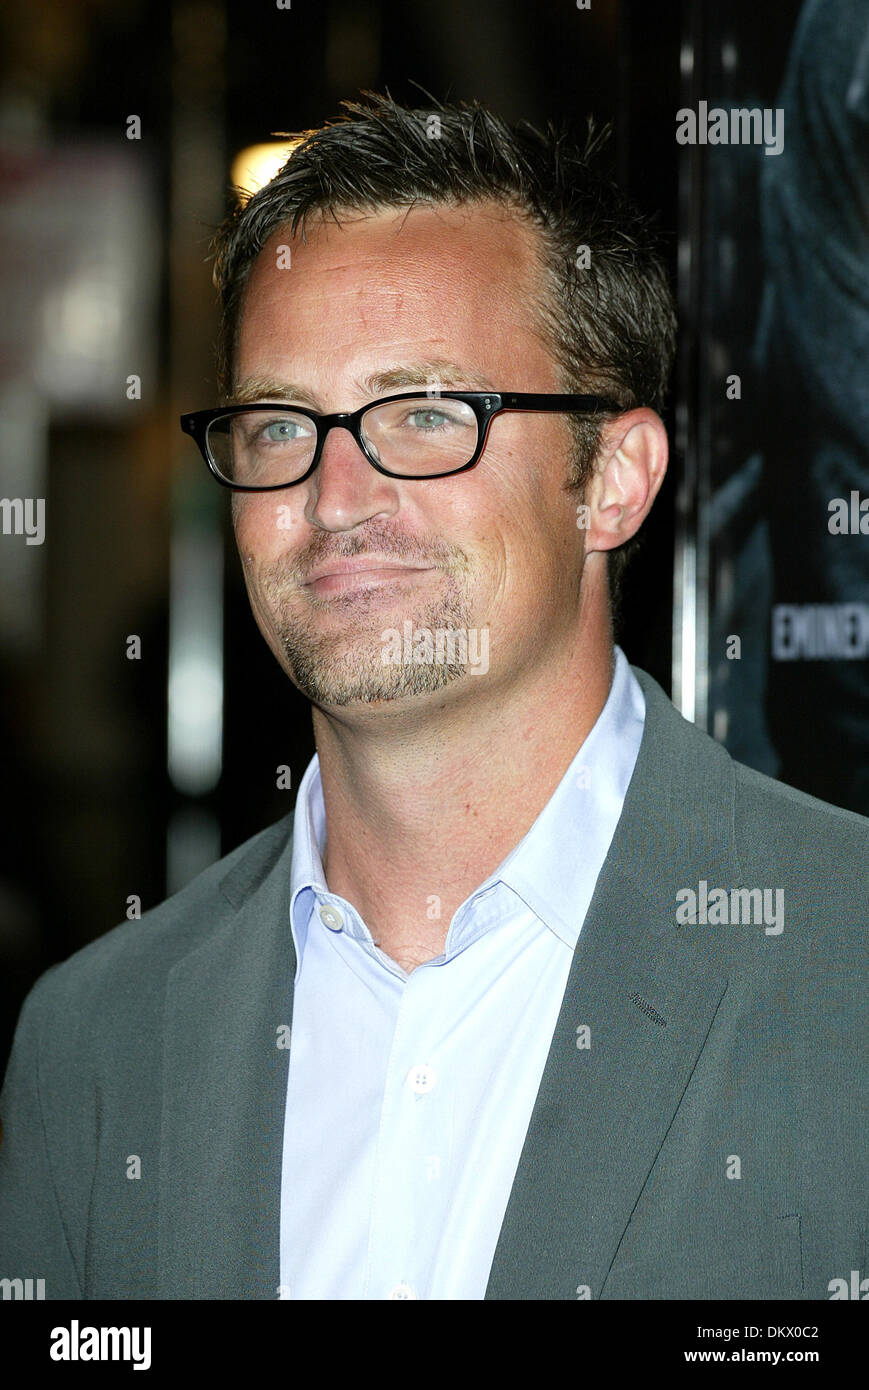 MATTHEW PERRY.ACTOR.WESTWOOD, LOS ANGELES, USA.06/11/2002.LAC10668. Stock Photo